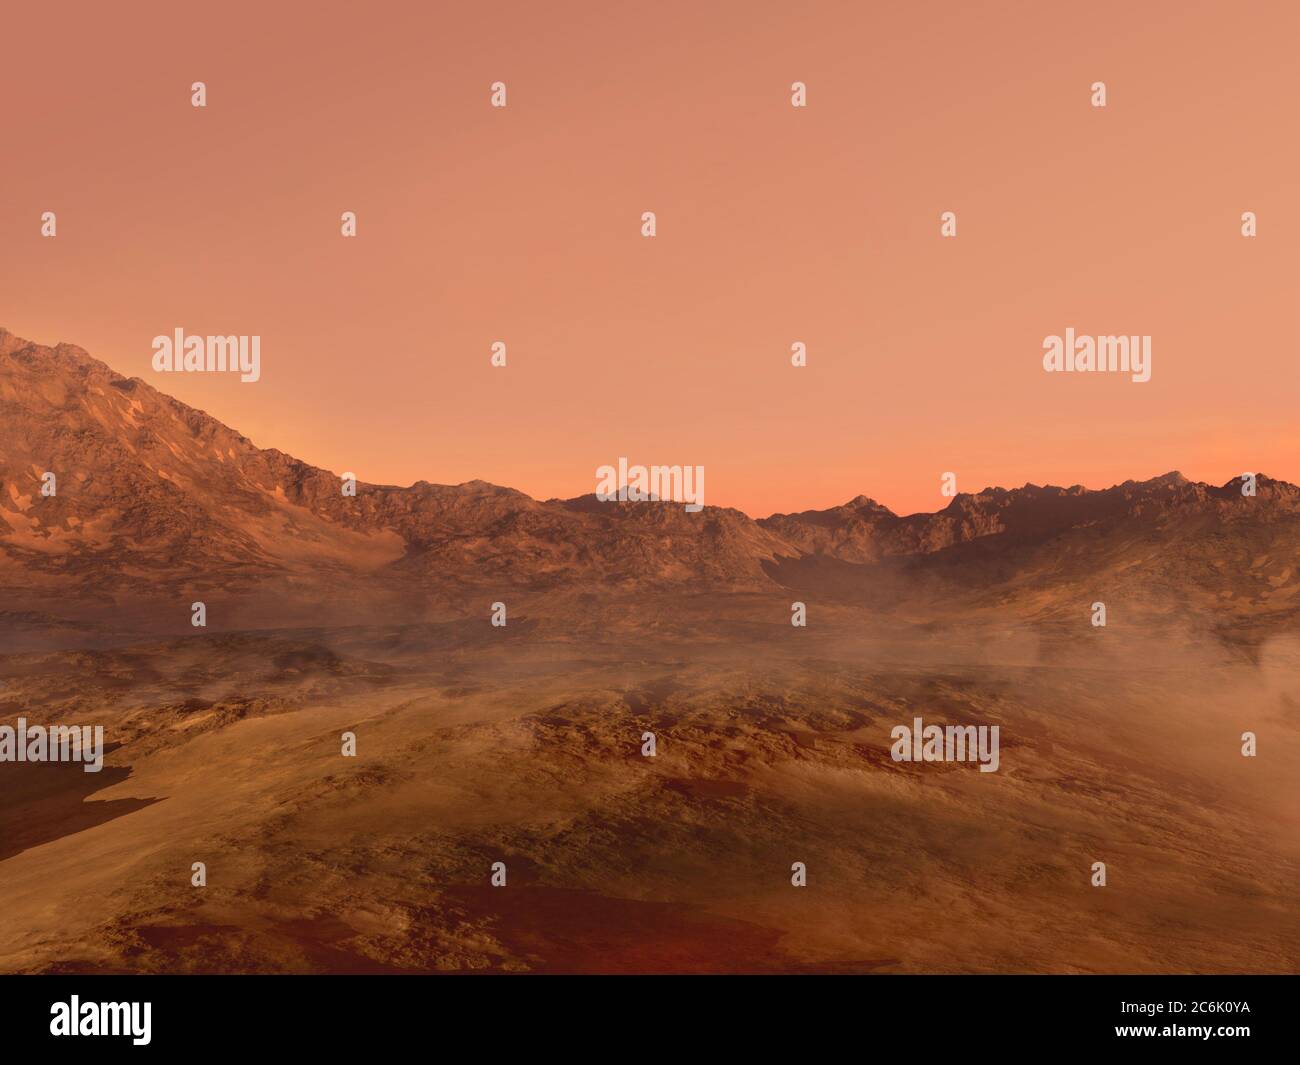 3D rendered Mars landscape with a red rocky terrain covered in fog, for science fiction or space exploration backgrounds. Stock Photo